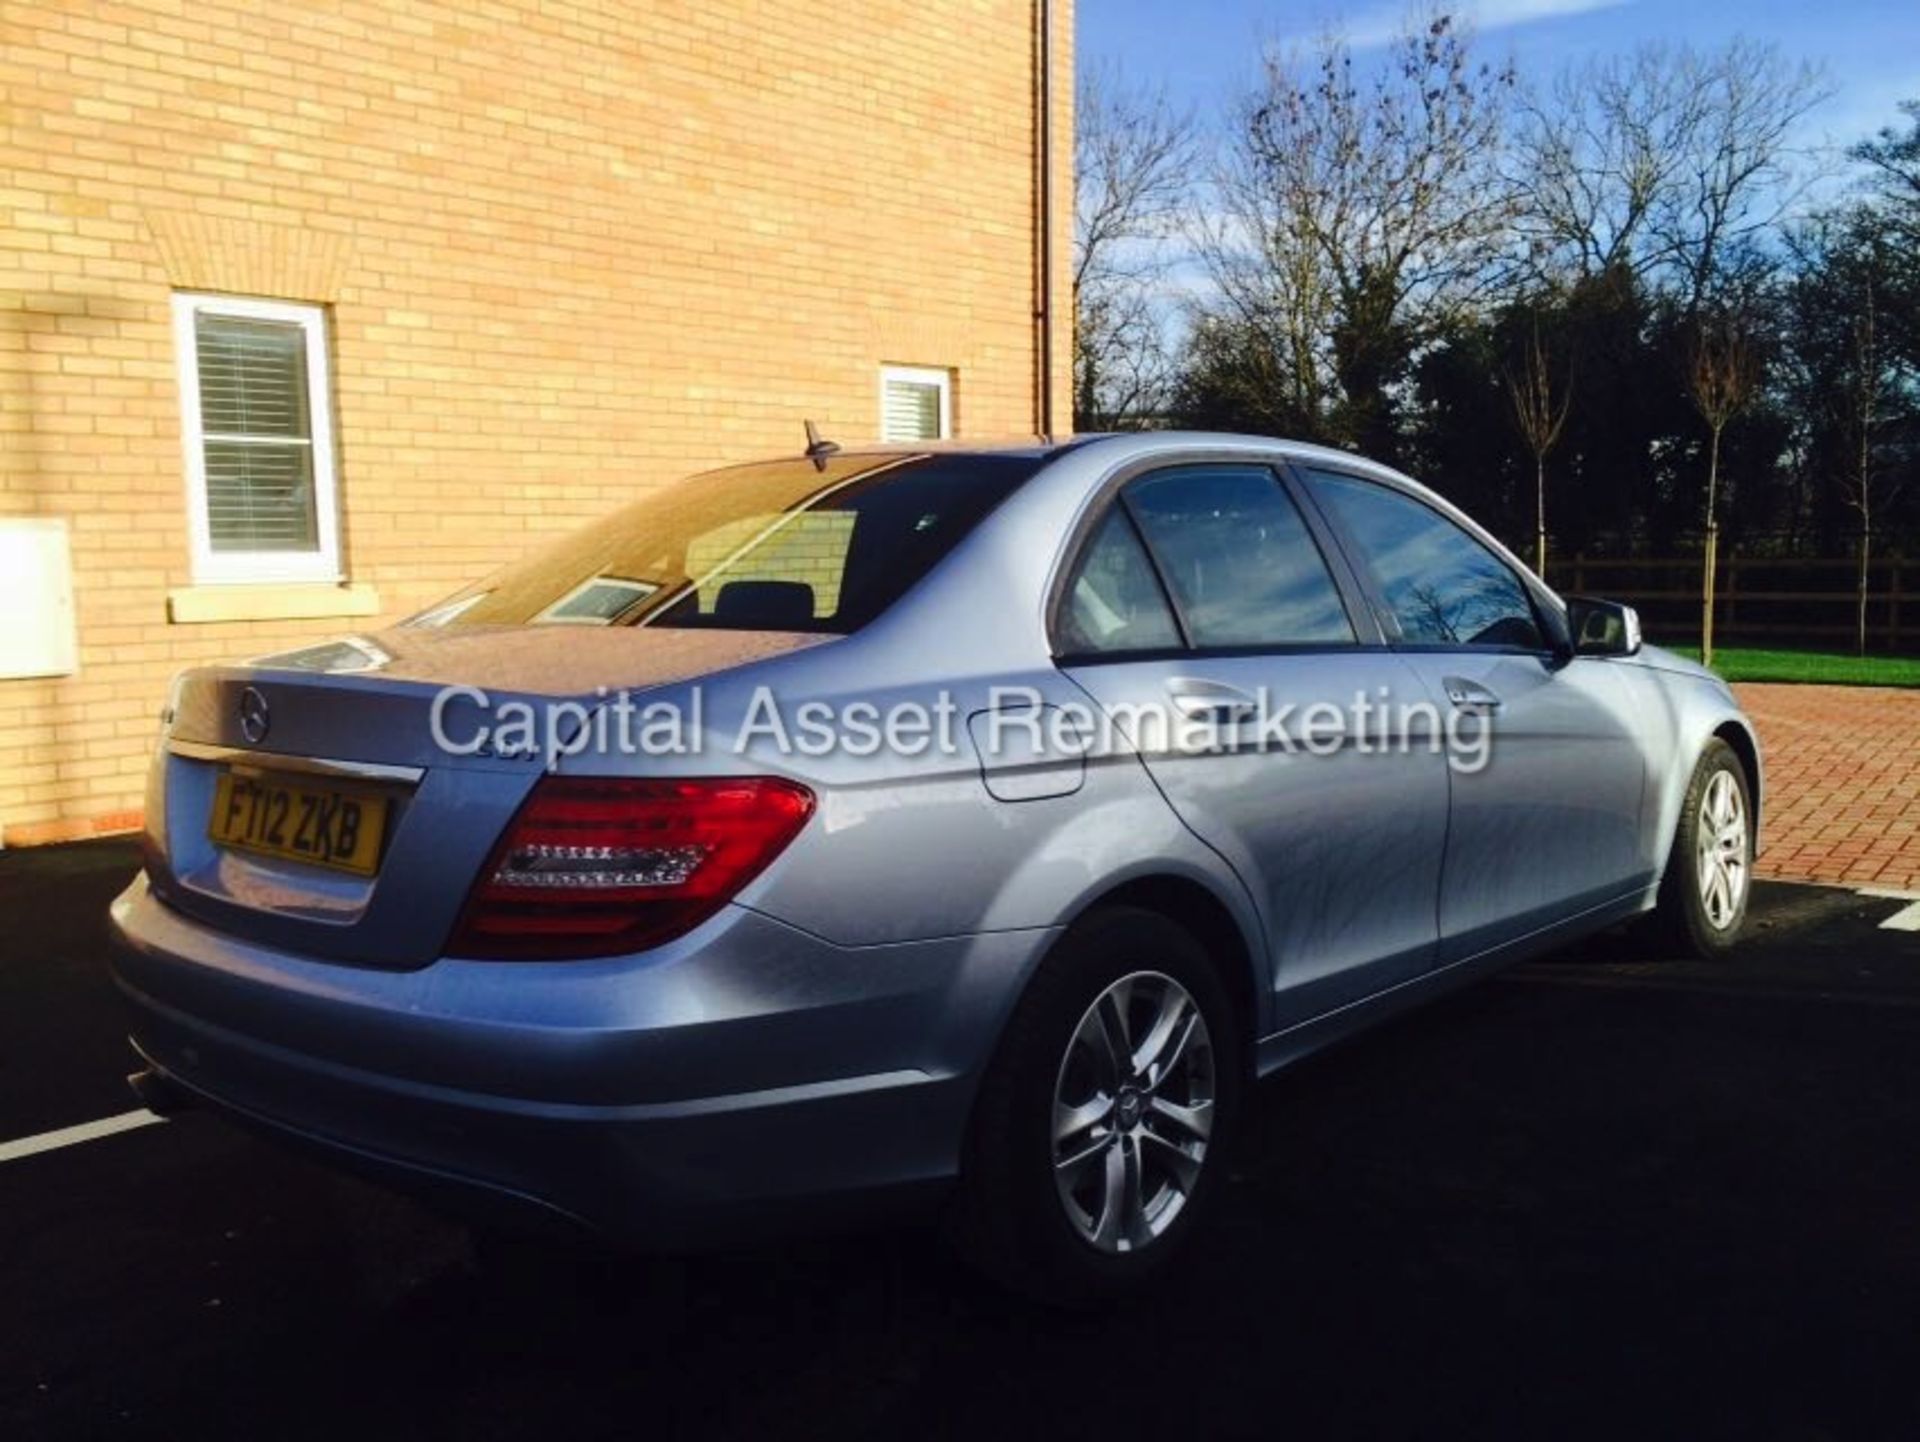 ON SALE MERCEDES C220CDI "EXECUTIVE SE" BLUE EFFINCY ECO (2012 -12 REG) 1 OWNER FROM NEW - LEATHER - Image 5 of 16